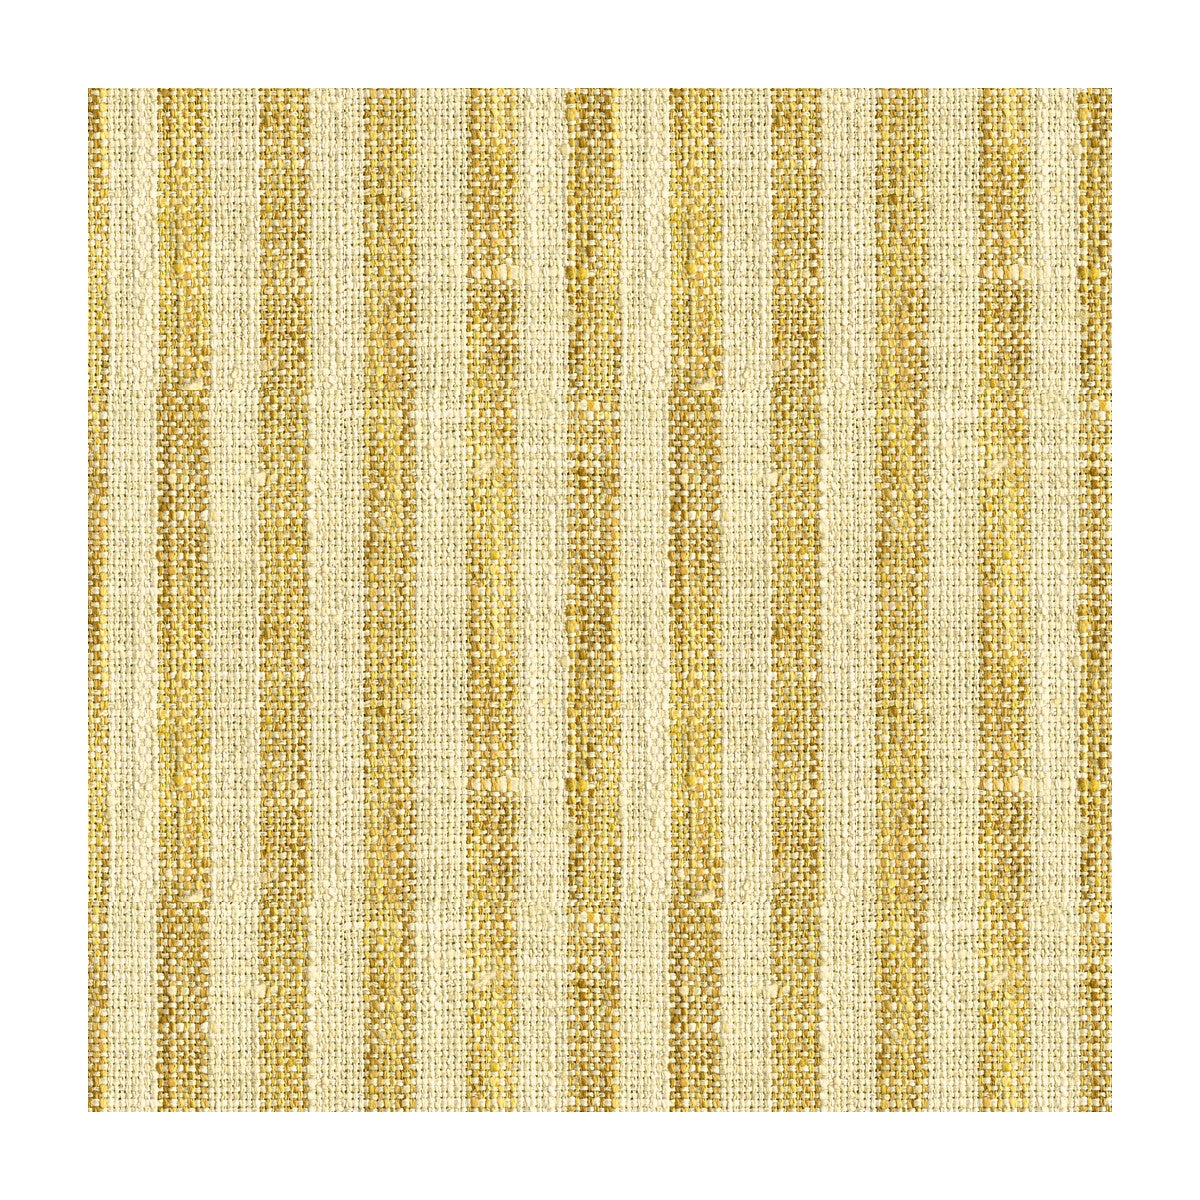 Kravet Basics fabric in 34080-416 color - pattern 34080.416.0 - by Kravet Basics in the Bungalow Chic II collection